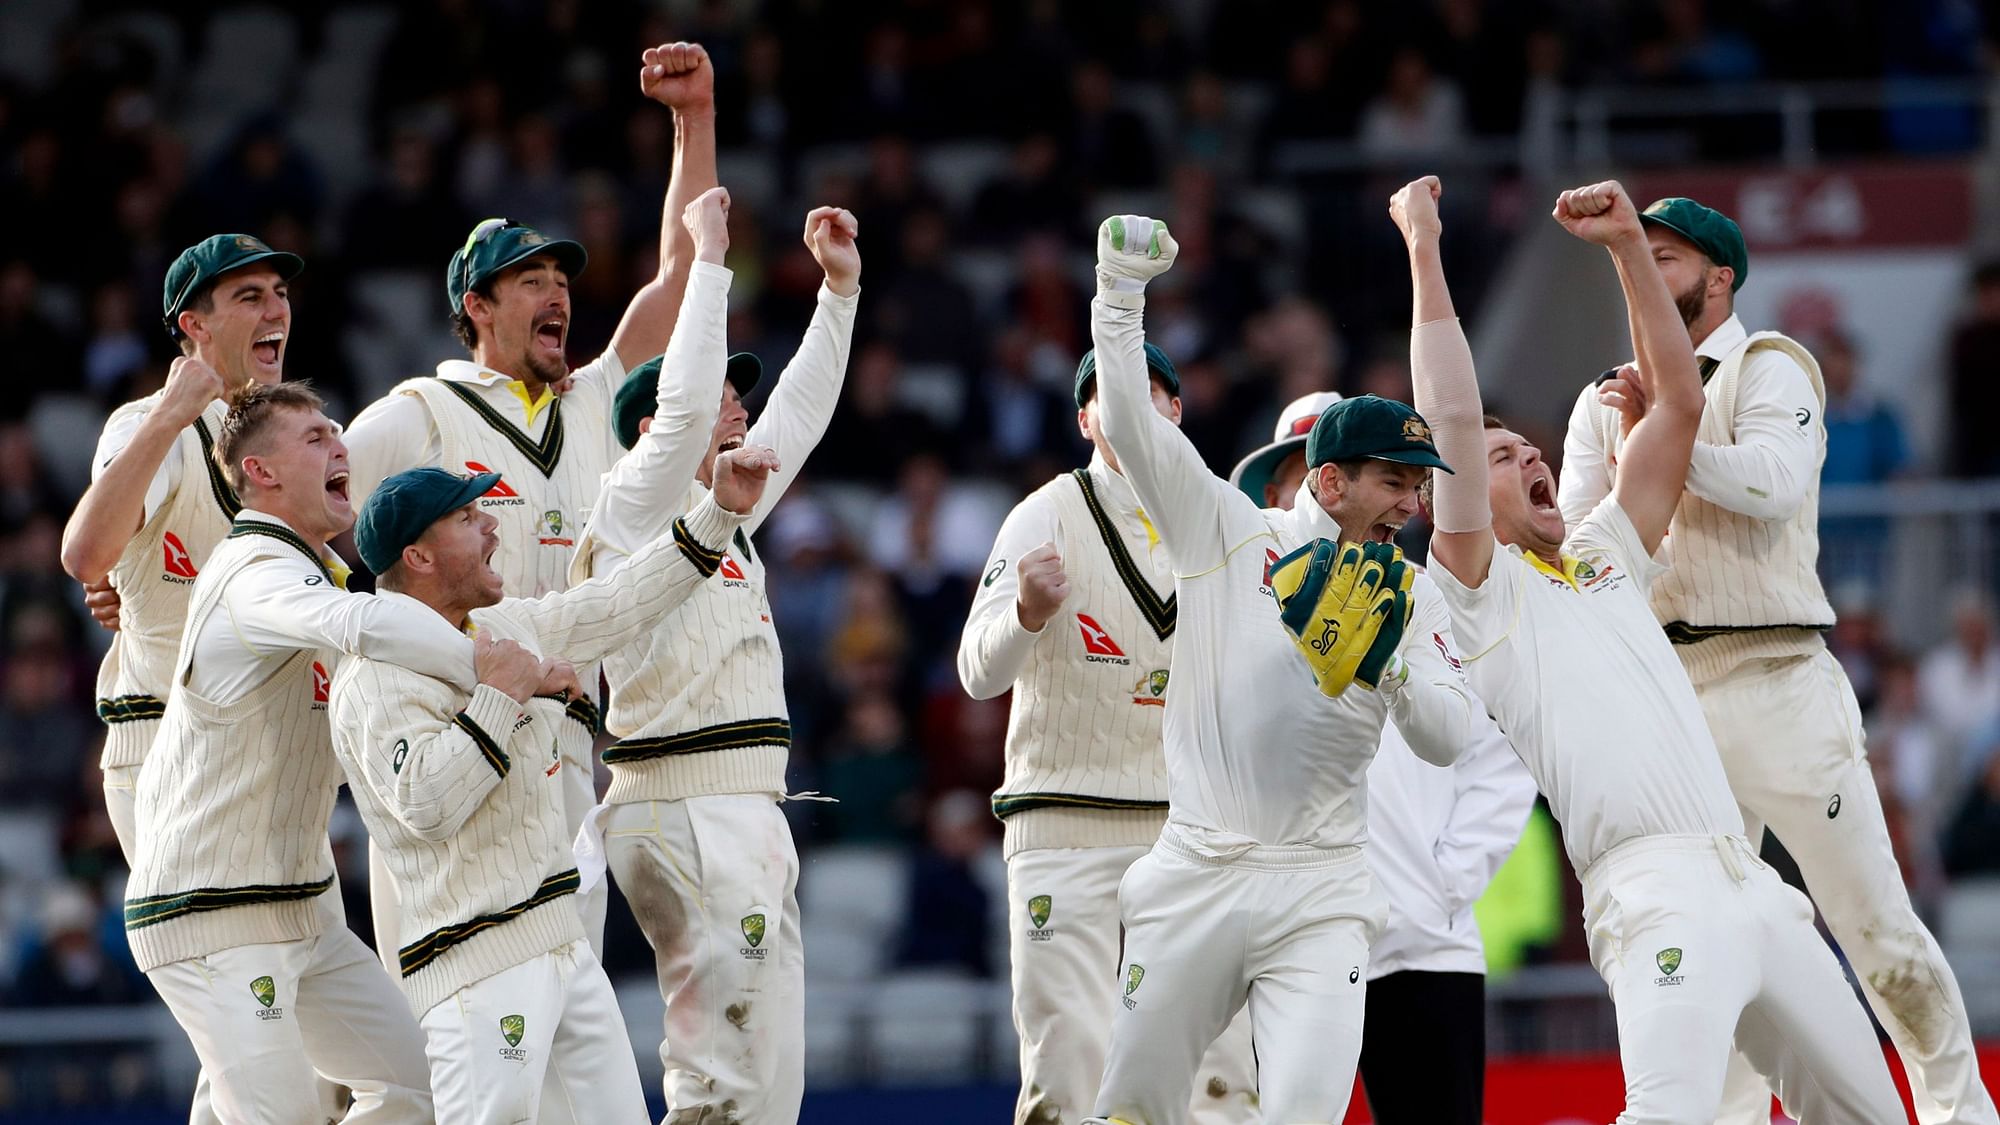 Australia players celebrate after winning the fourth test and retaining the Ashes during day five of the fourth Ashes Test cricket match between England and Australia at Old Trafford in Manchester, England, Sunday Sept 8, 2019.&nbsp;